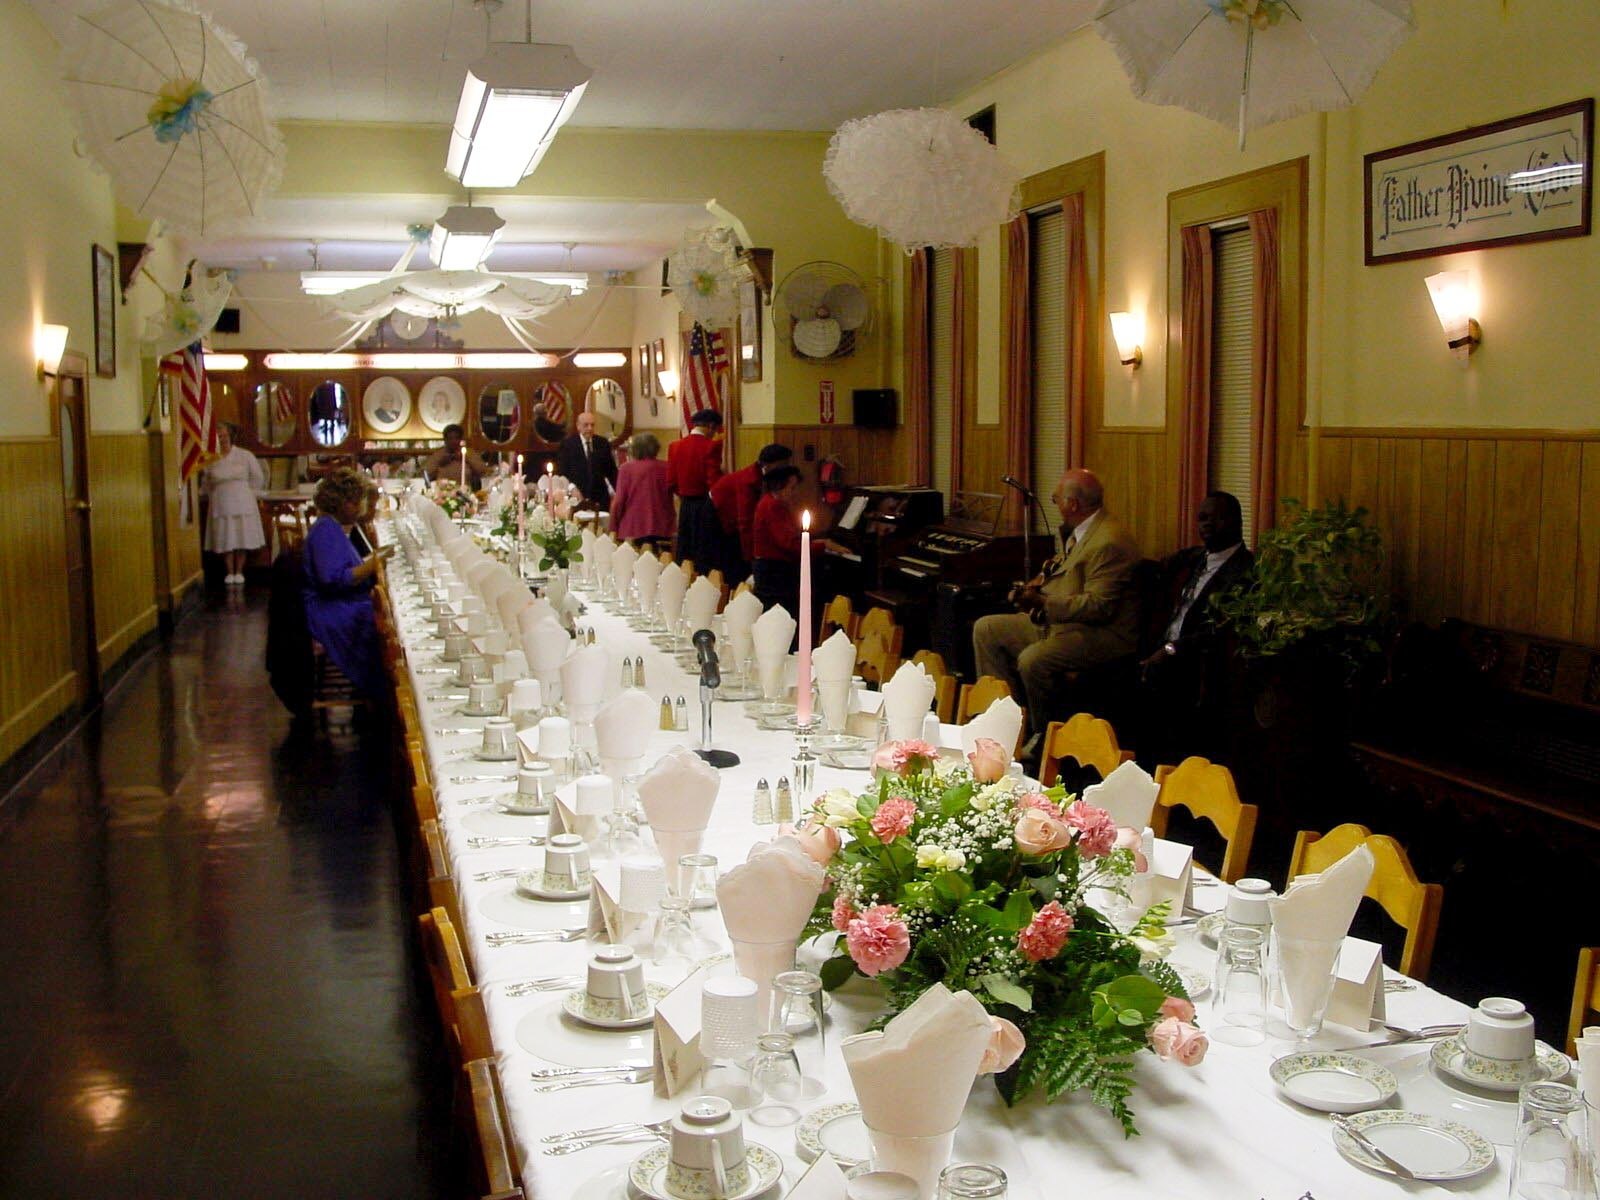 The Banquet Table at Circle Mission Church Philadelphia